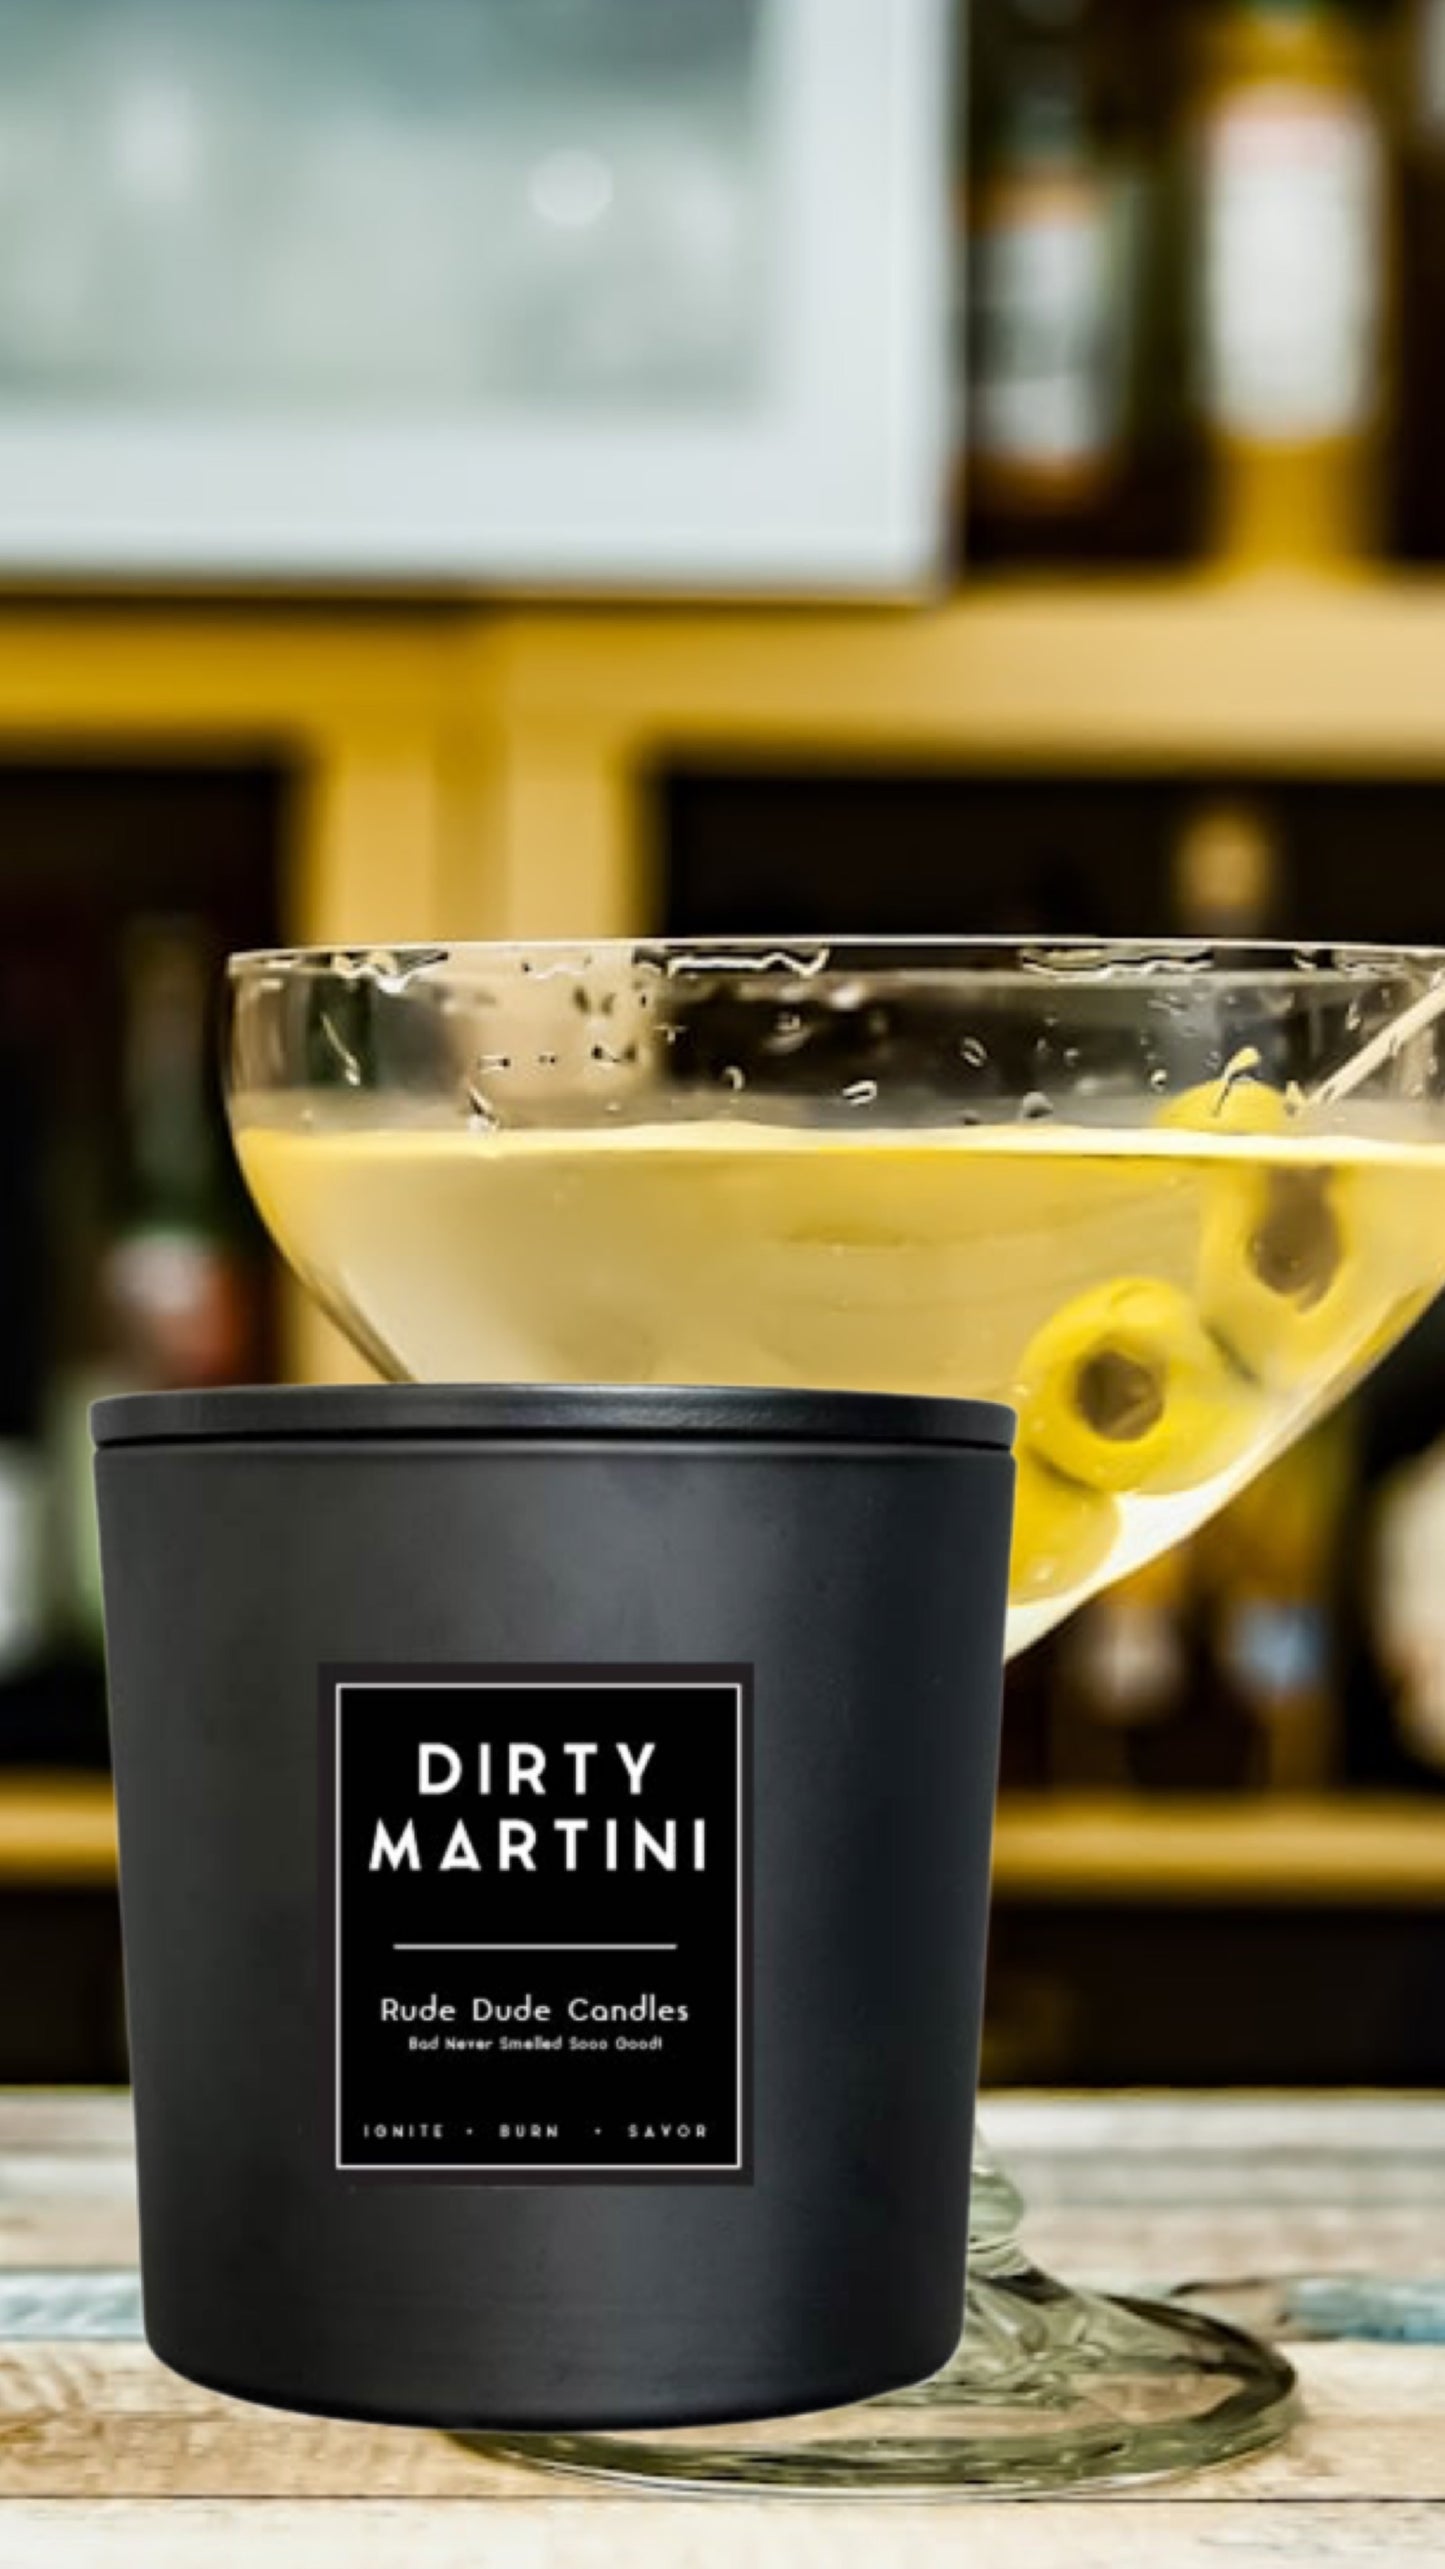 Rude Dude DIRTY MARTINI - Candle 18 oz - 512 g